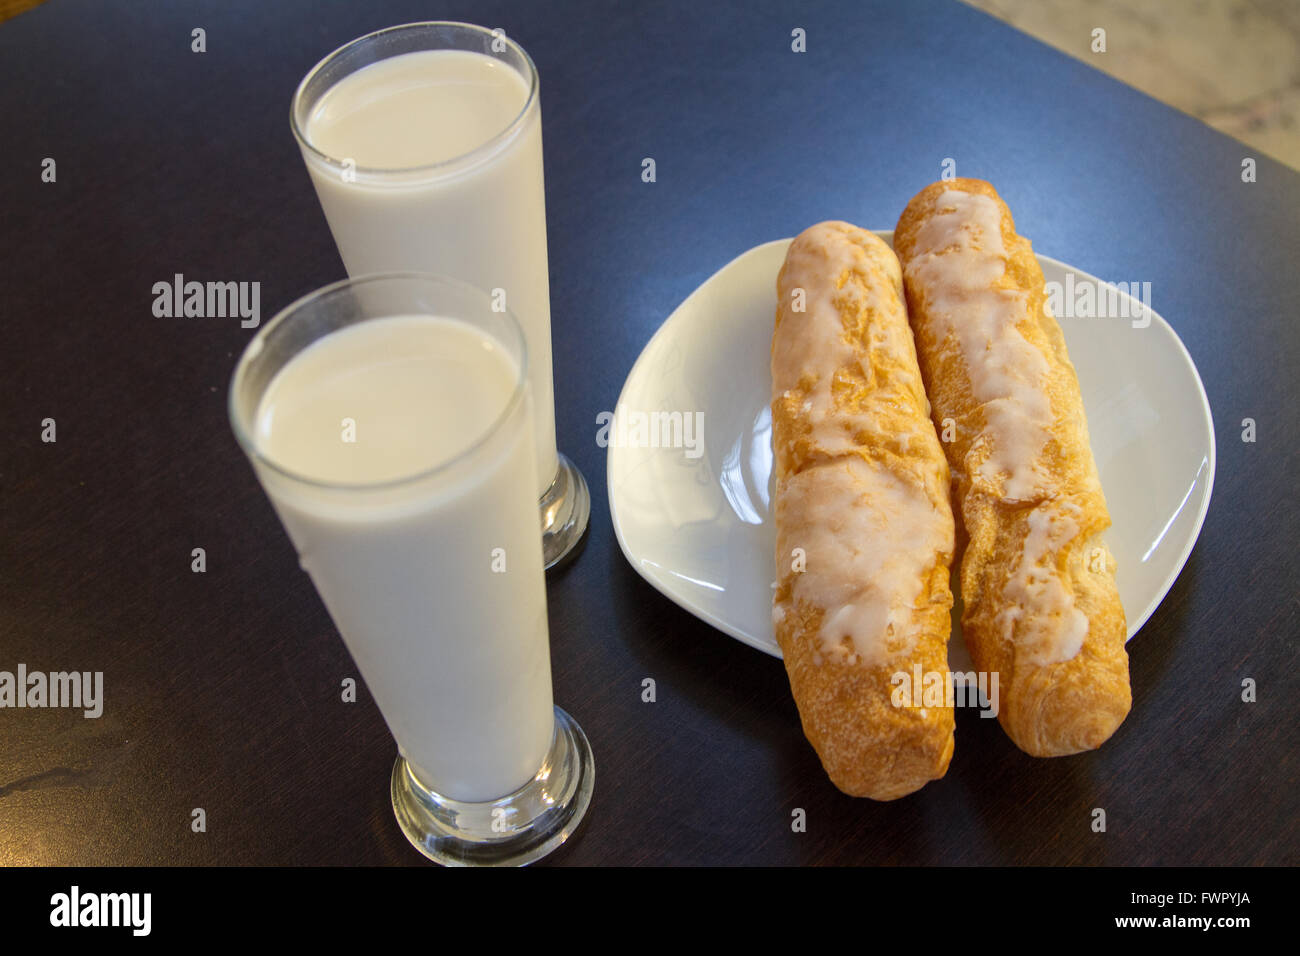 Horchata drink made from ground tiger nuts (chufa) with Farton sweet bread Specialty of Valencia Spain Stock Photo